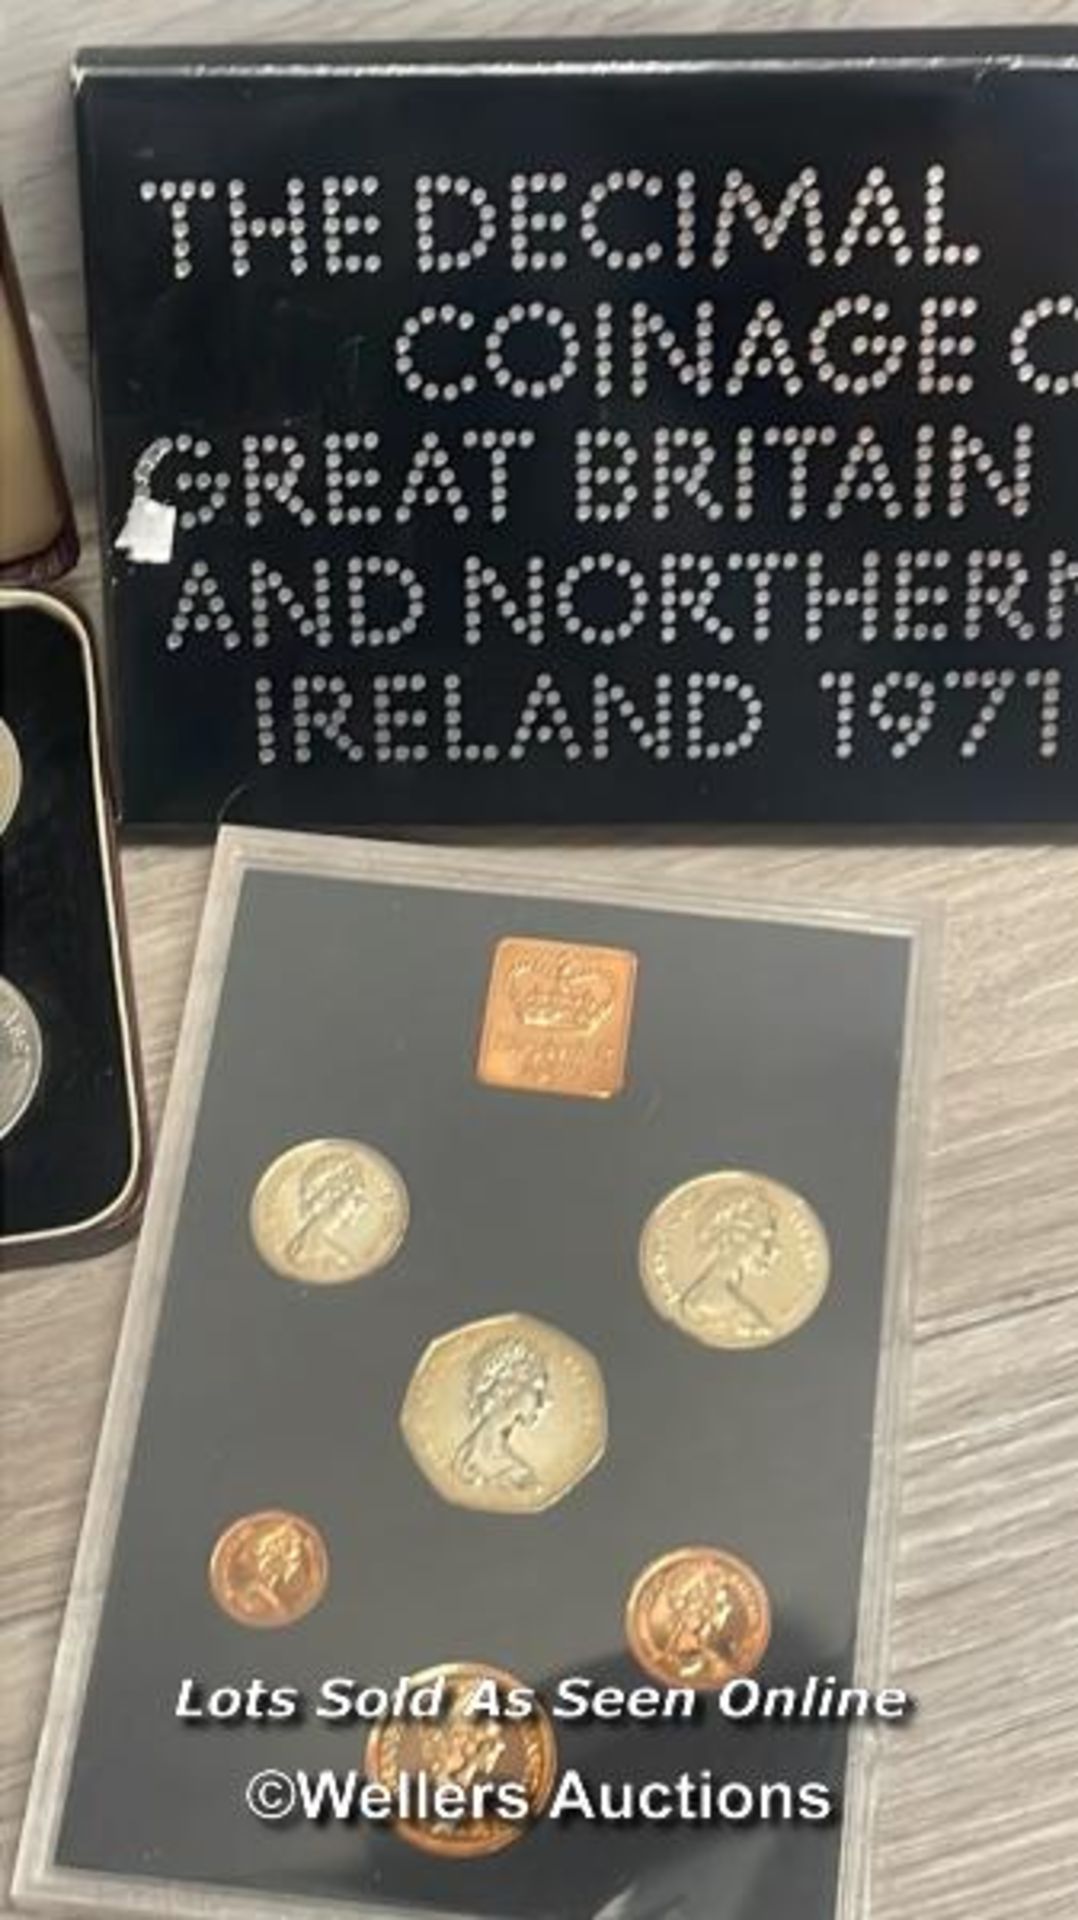 COLLECTION OF COINS, INCLUDING 1970 COINAGE OF GREAT BRITAIN AND WINSTON CHURCHILL COMMEMORATIVE - Bild 3 aus 9